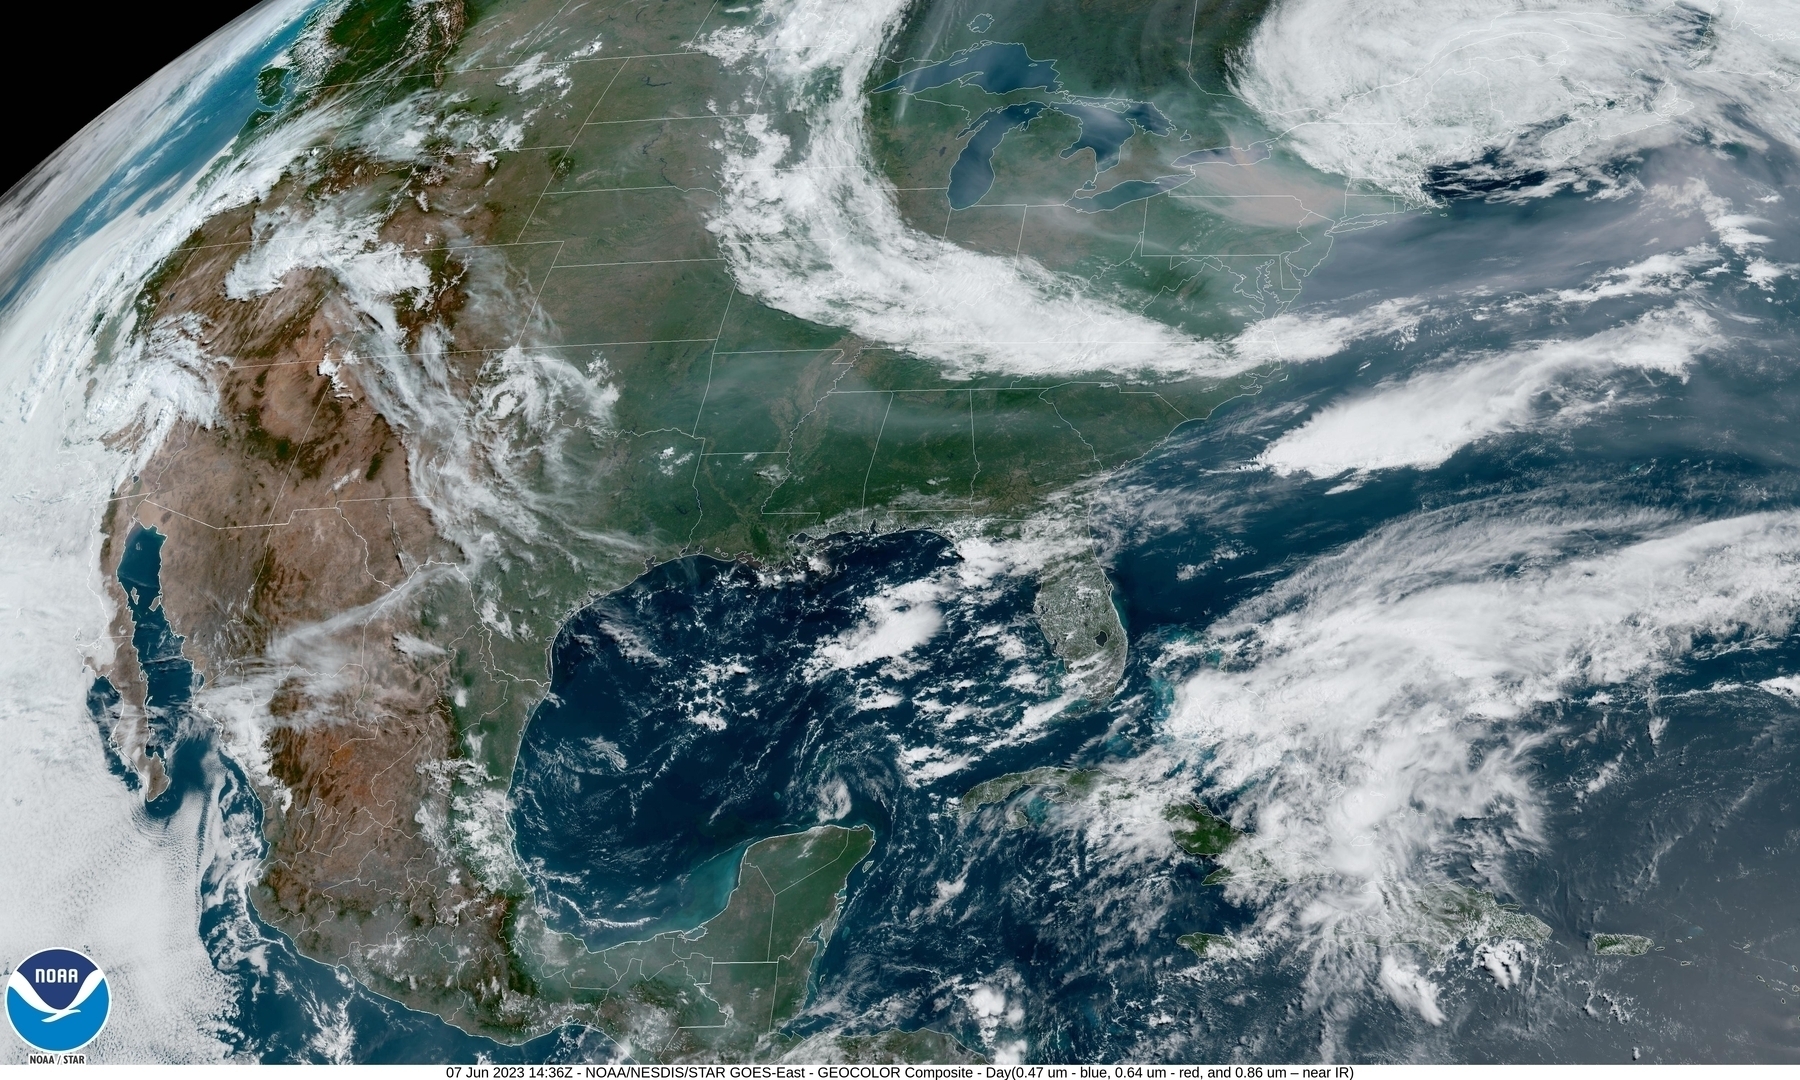 GOES satellite view of the continential united states showing smoky air